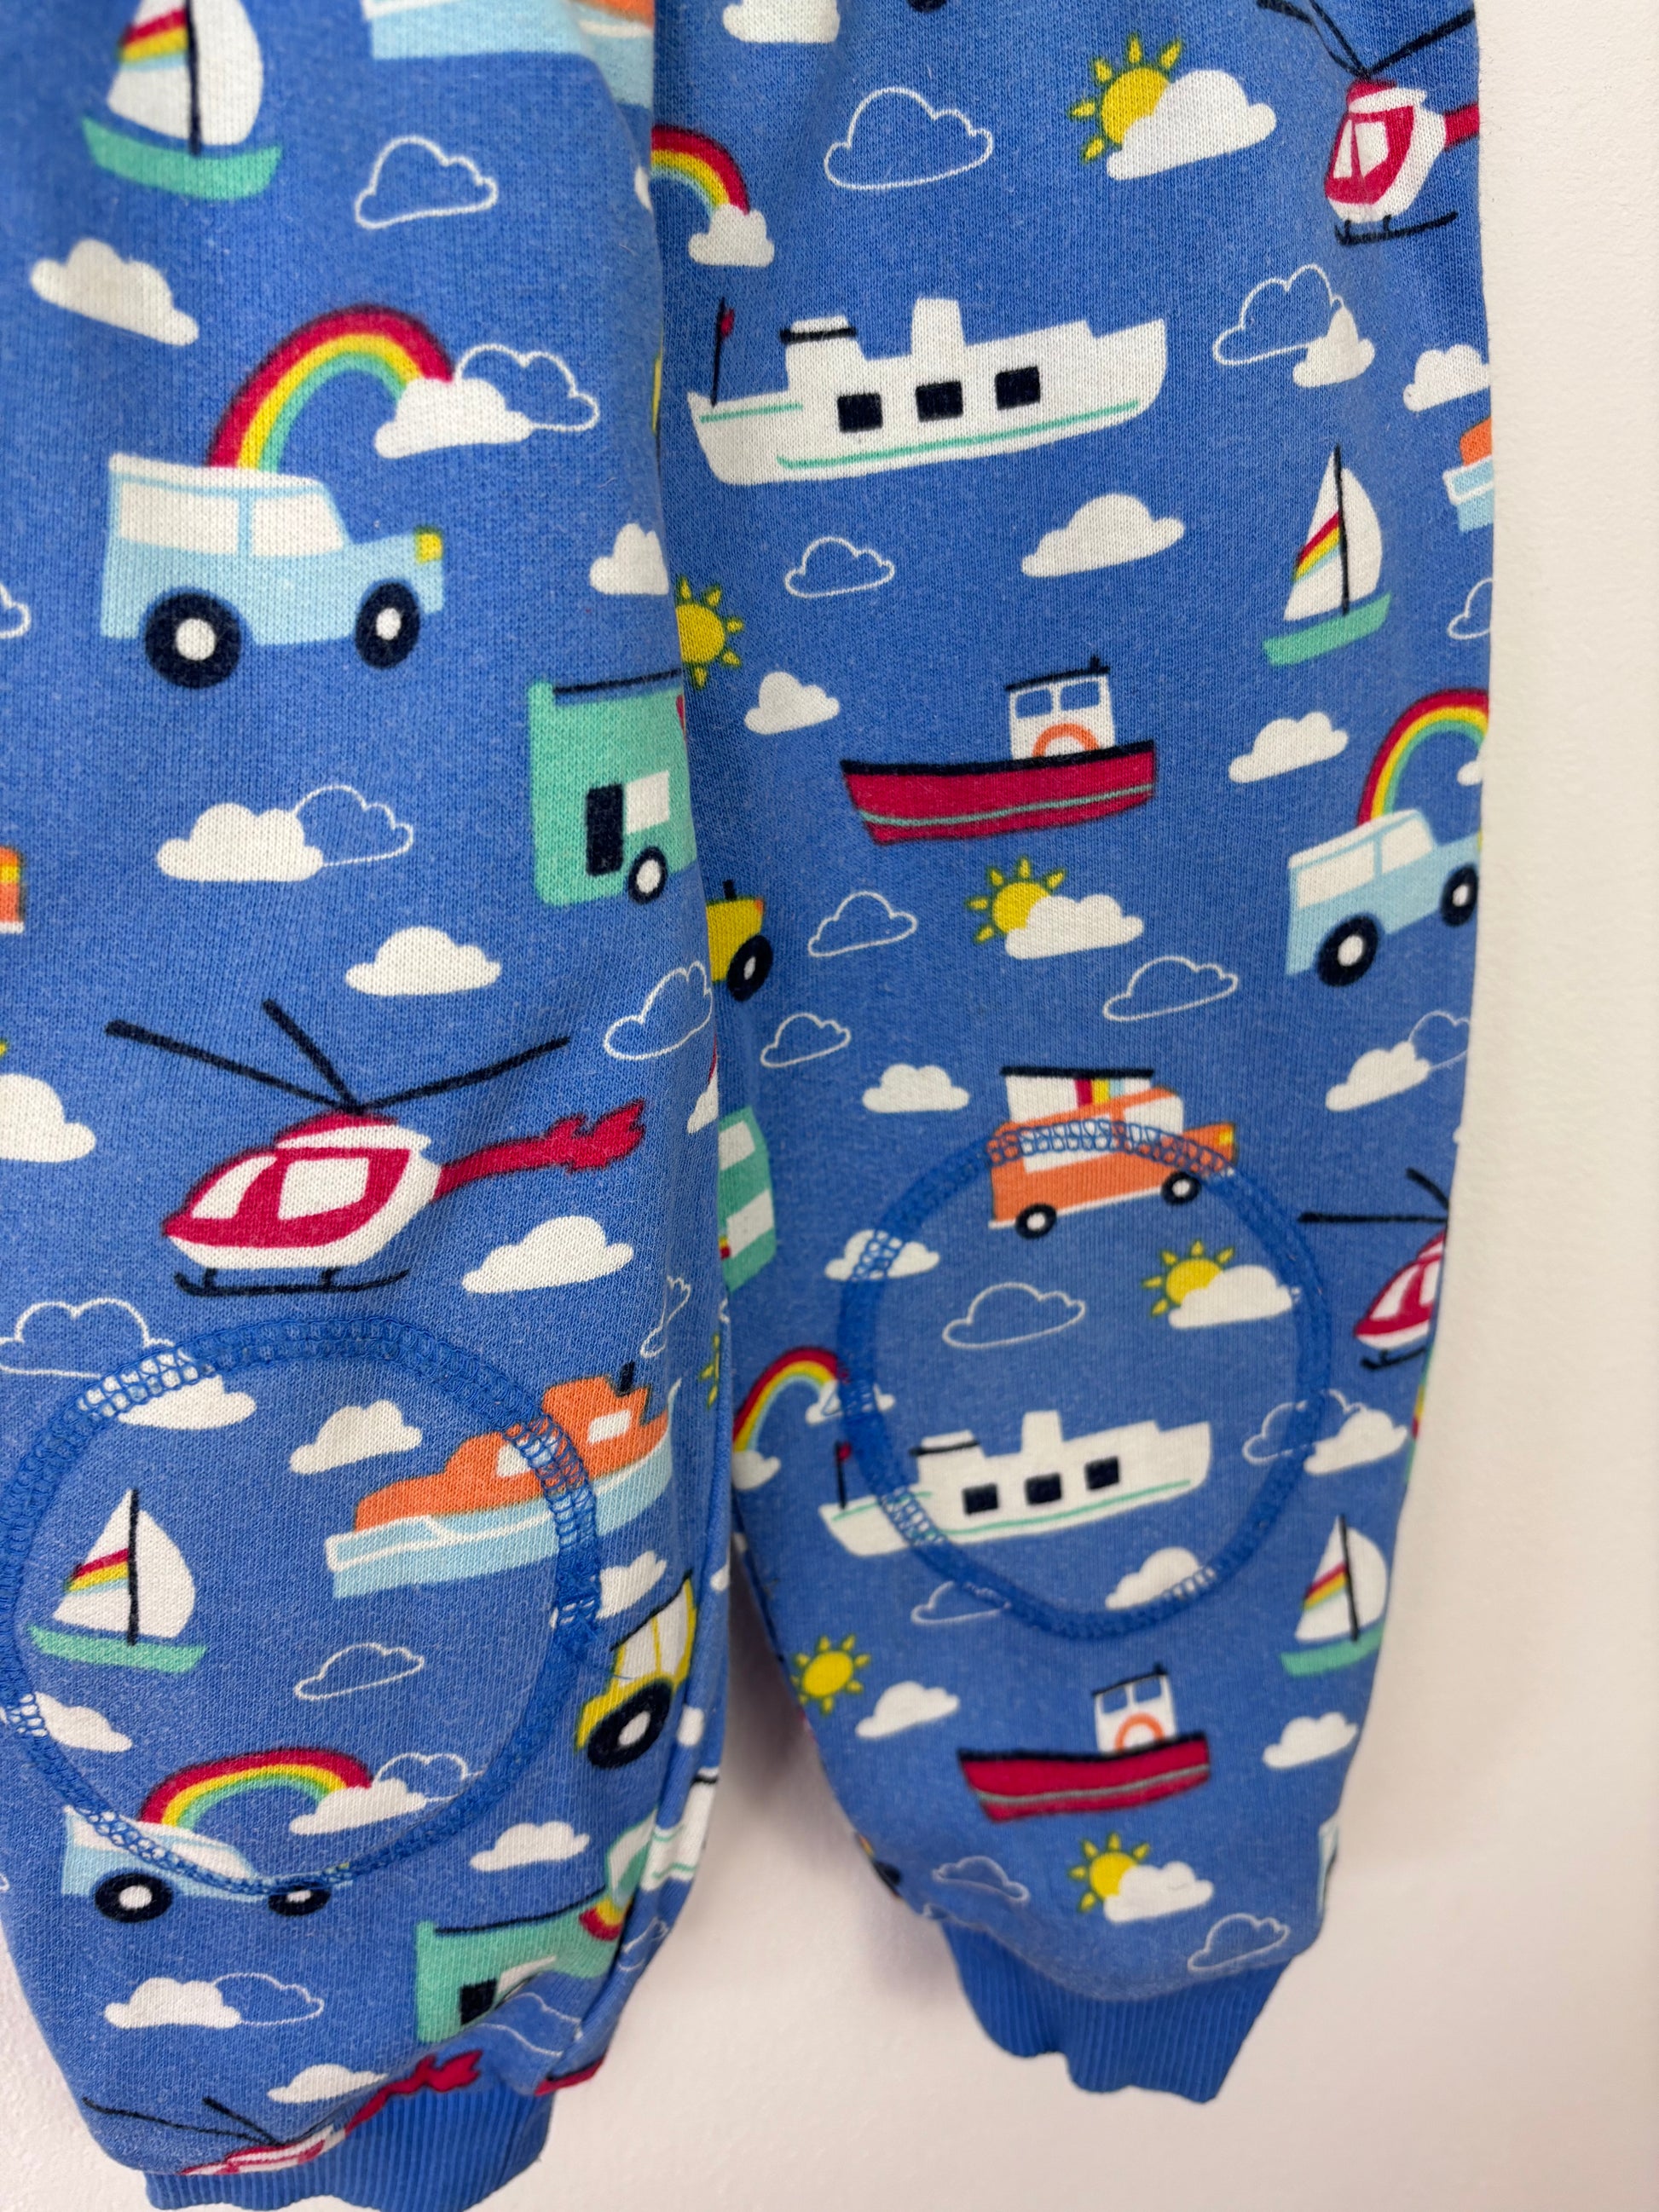 Frugi 12-18 Months-Trousers-Second Snuggle Preloved